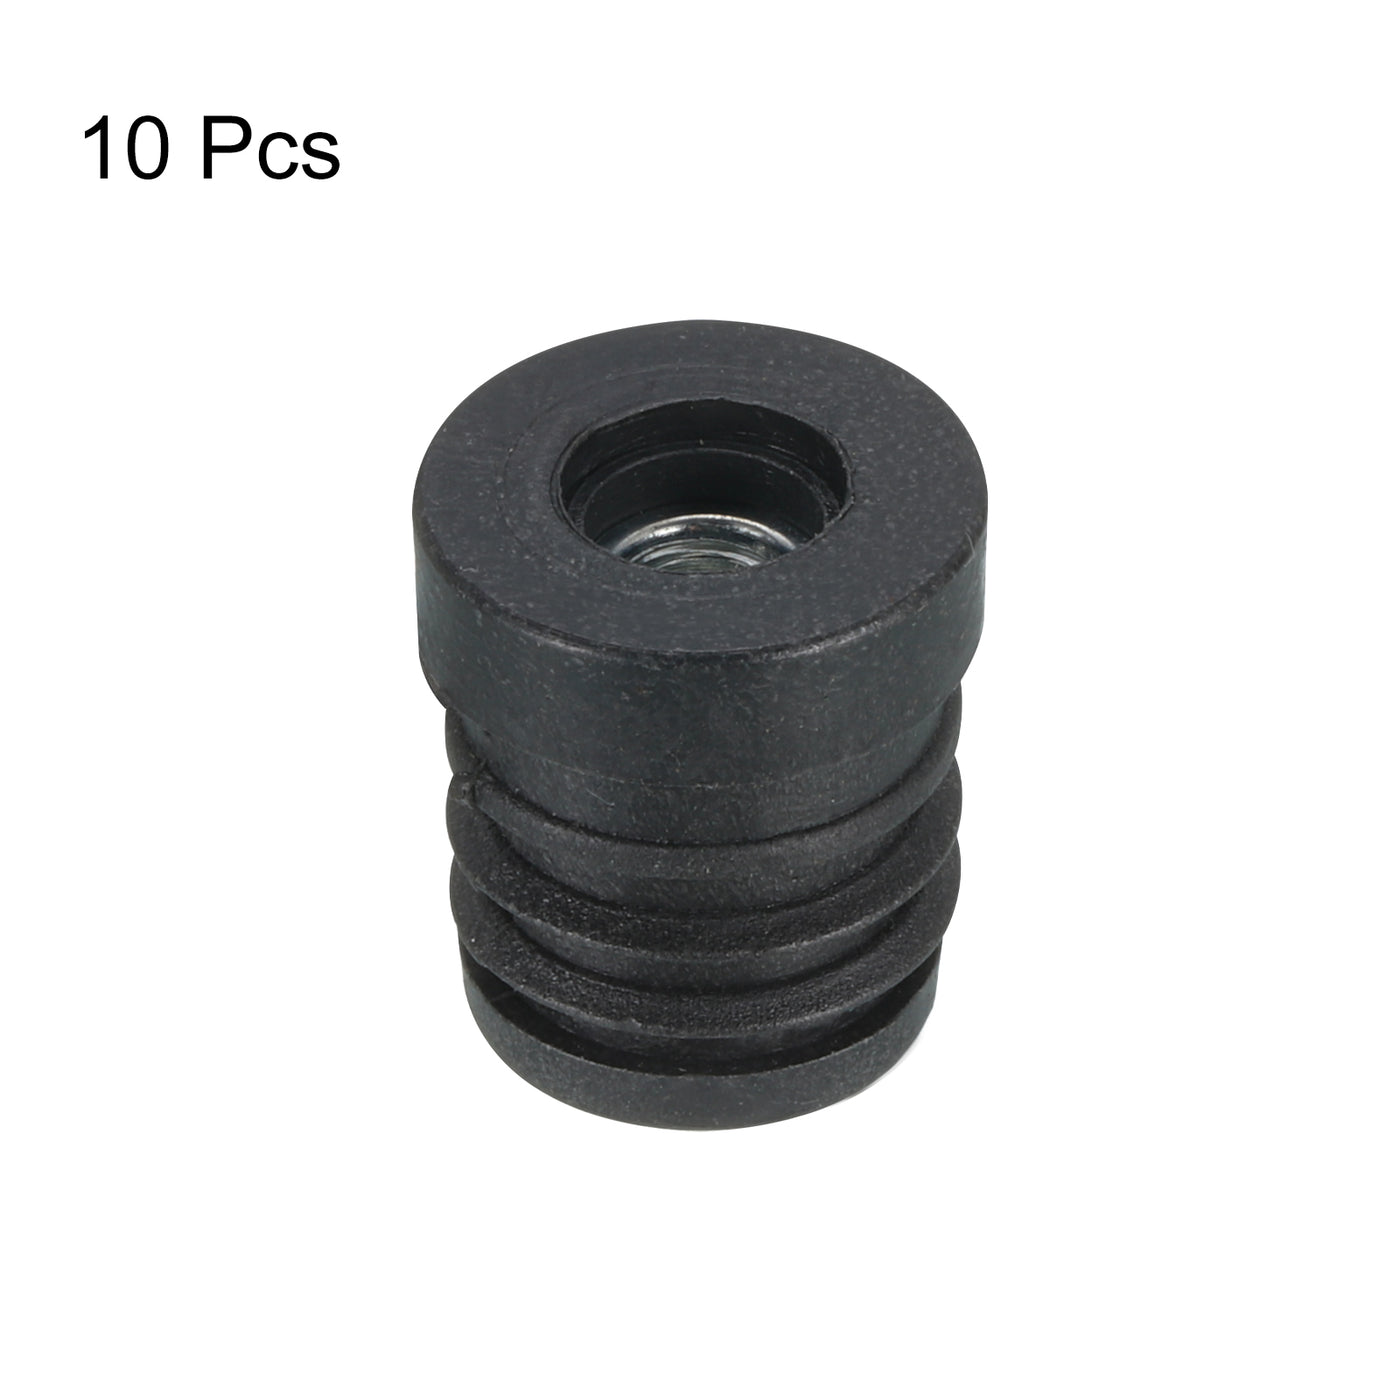 uxcell Uxcell 10Pcs Caster Insert with Thread, 19mm/0.75" M6 Thread for Furniture